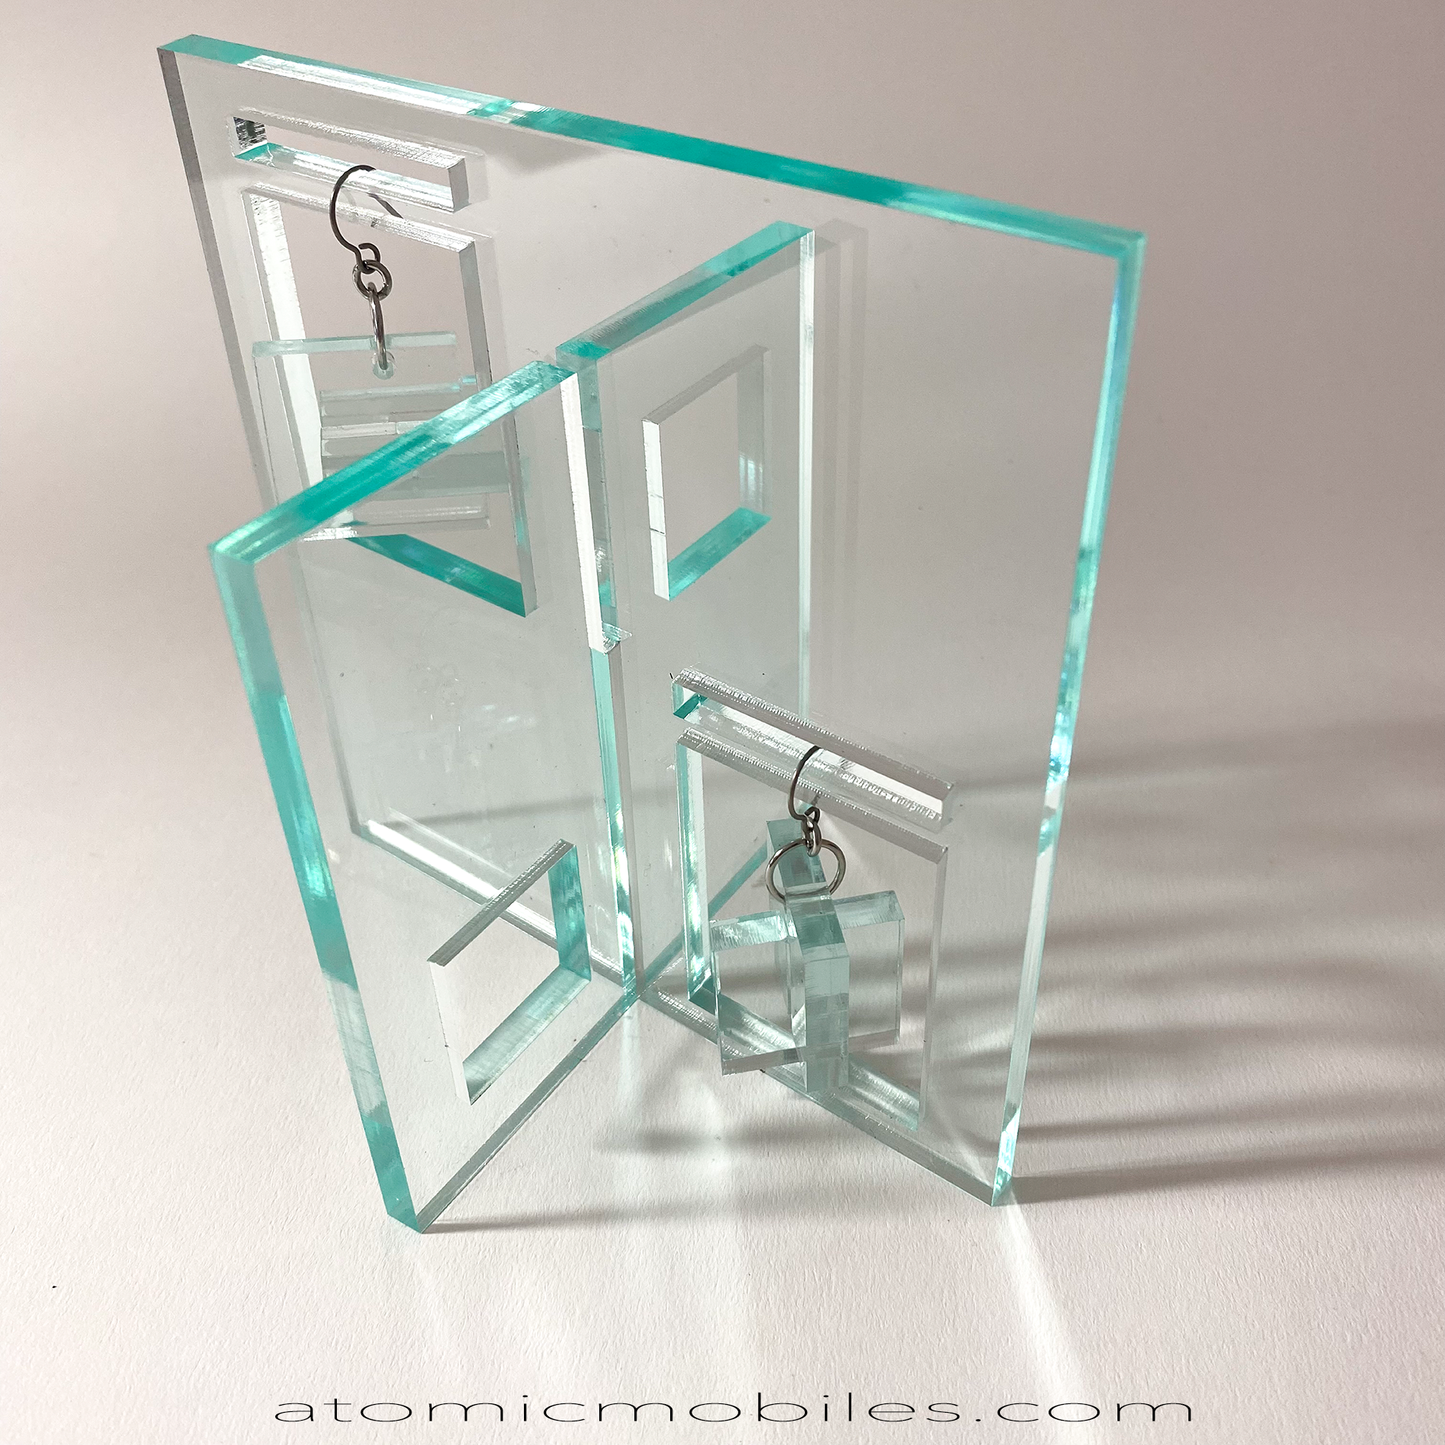 Moderne Earrings and Art Stabile Set in glass-look clear acrylic plexiglass - modern art sculpture stabile by AtomicMobiles.com